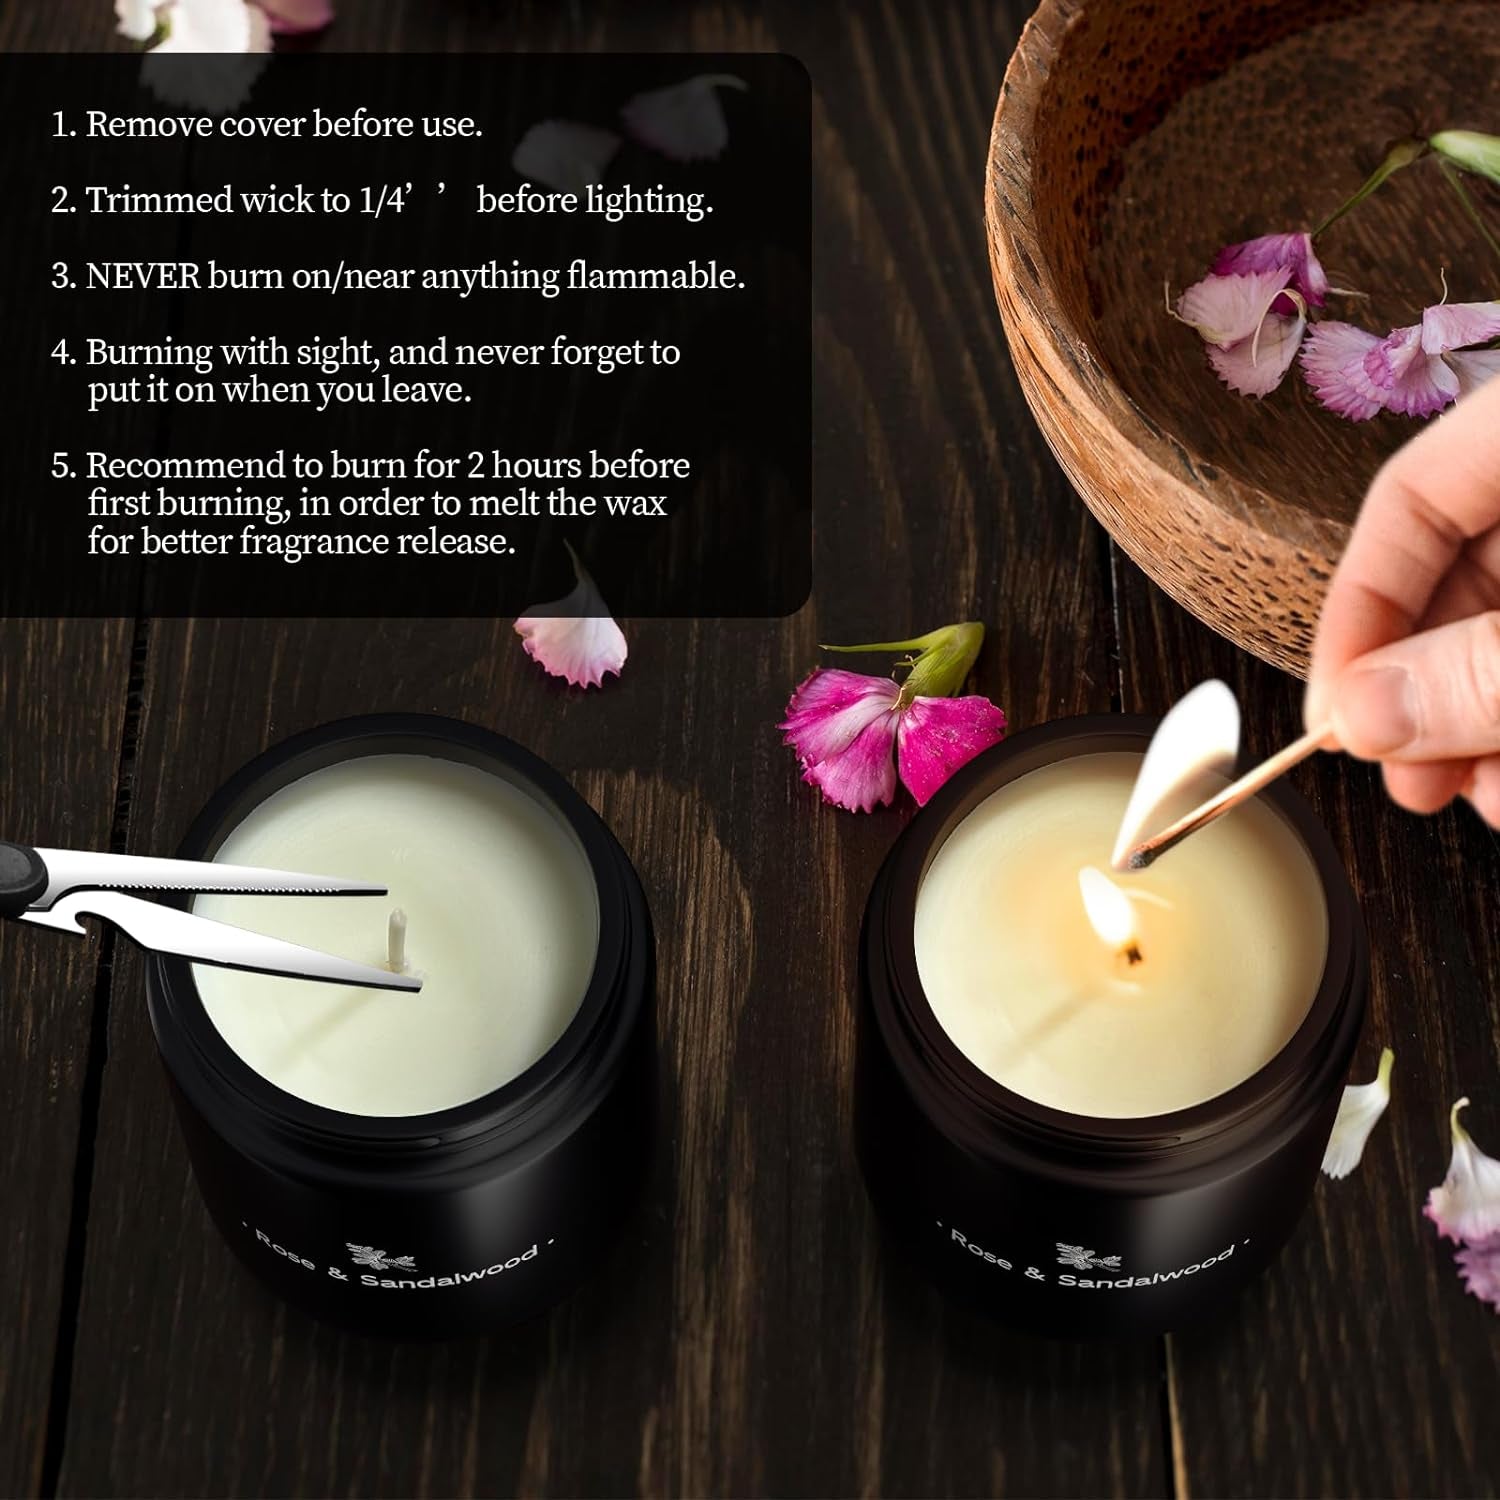 Scented Candles for Home Scented, Strong Fragranced Aromatherapy Candle - 7.6 Oz, 100% Soy Wax - Christmas Candles Scented for Men & Women in Black Jar, Rose & Sandalwood